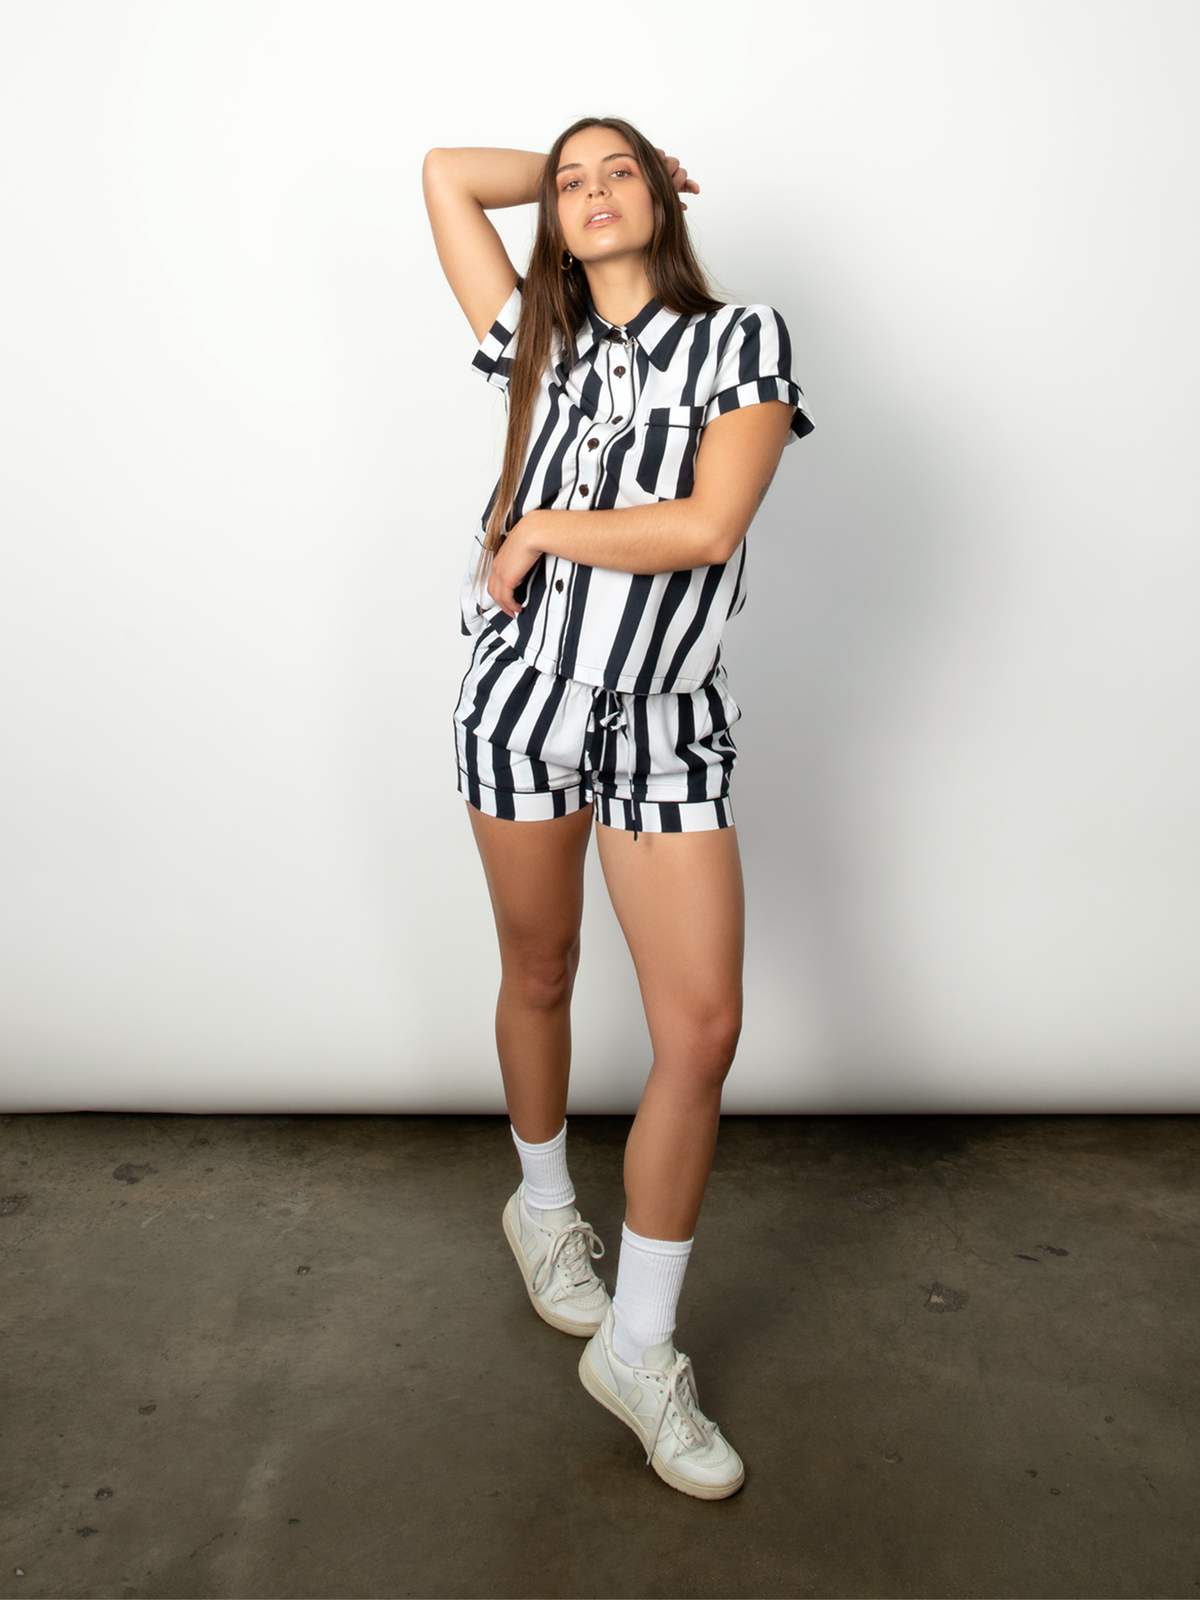 Woman wears a black and white striped short-sleeve shirt and poses in a studio.